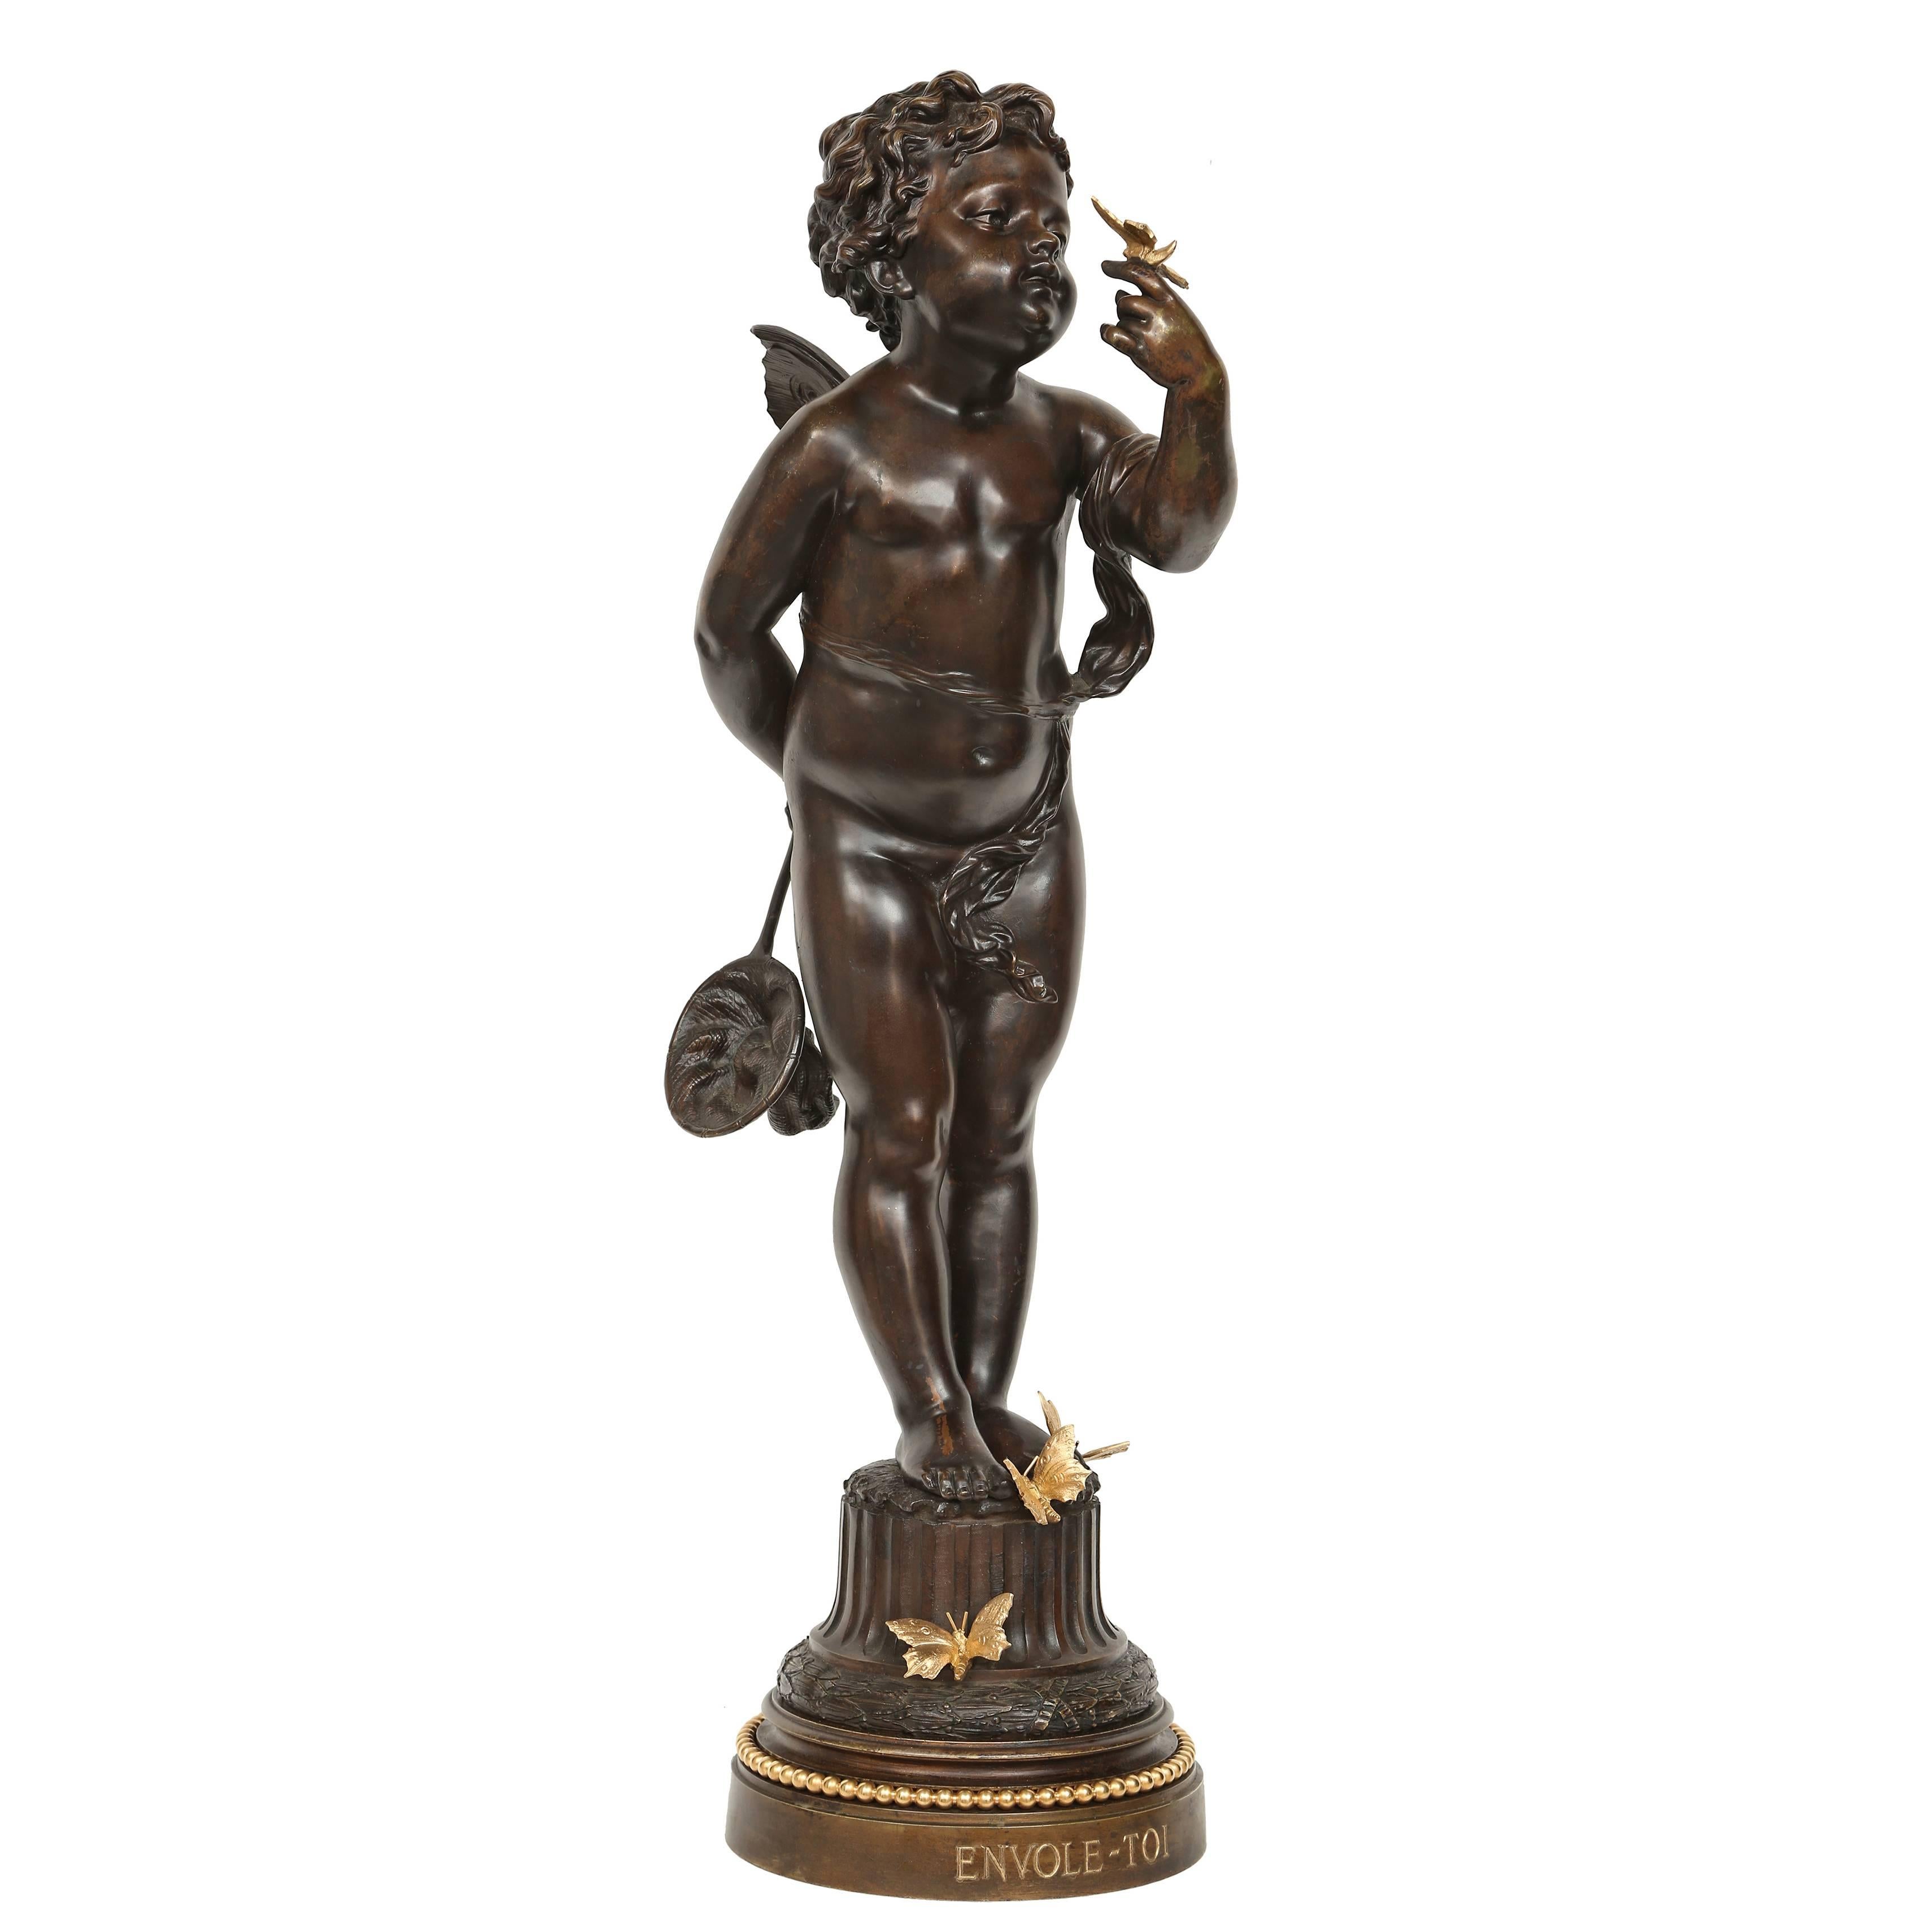 French 19th Century Patinated Bronze Statue Attributed to Fervill Suan